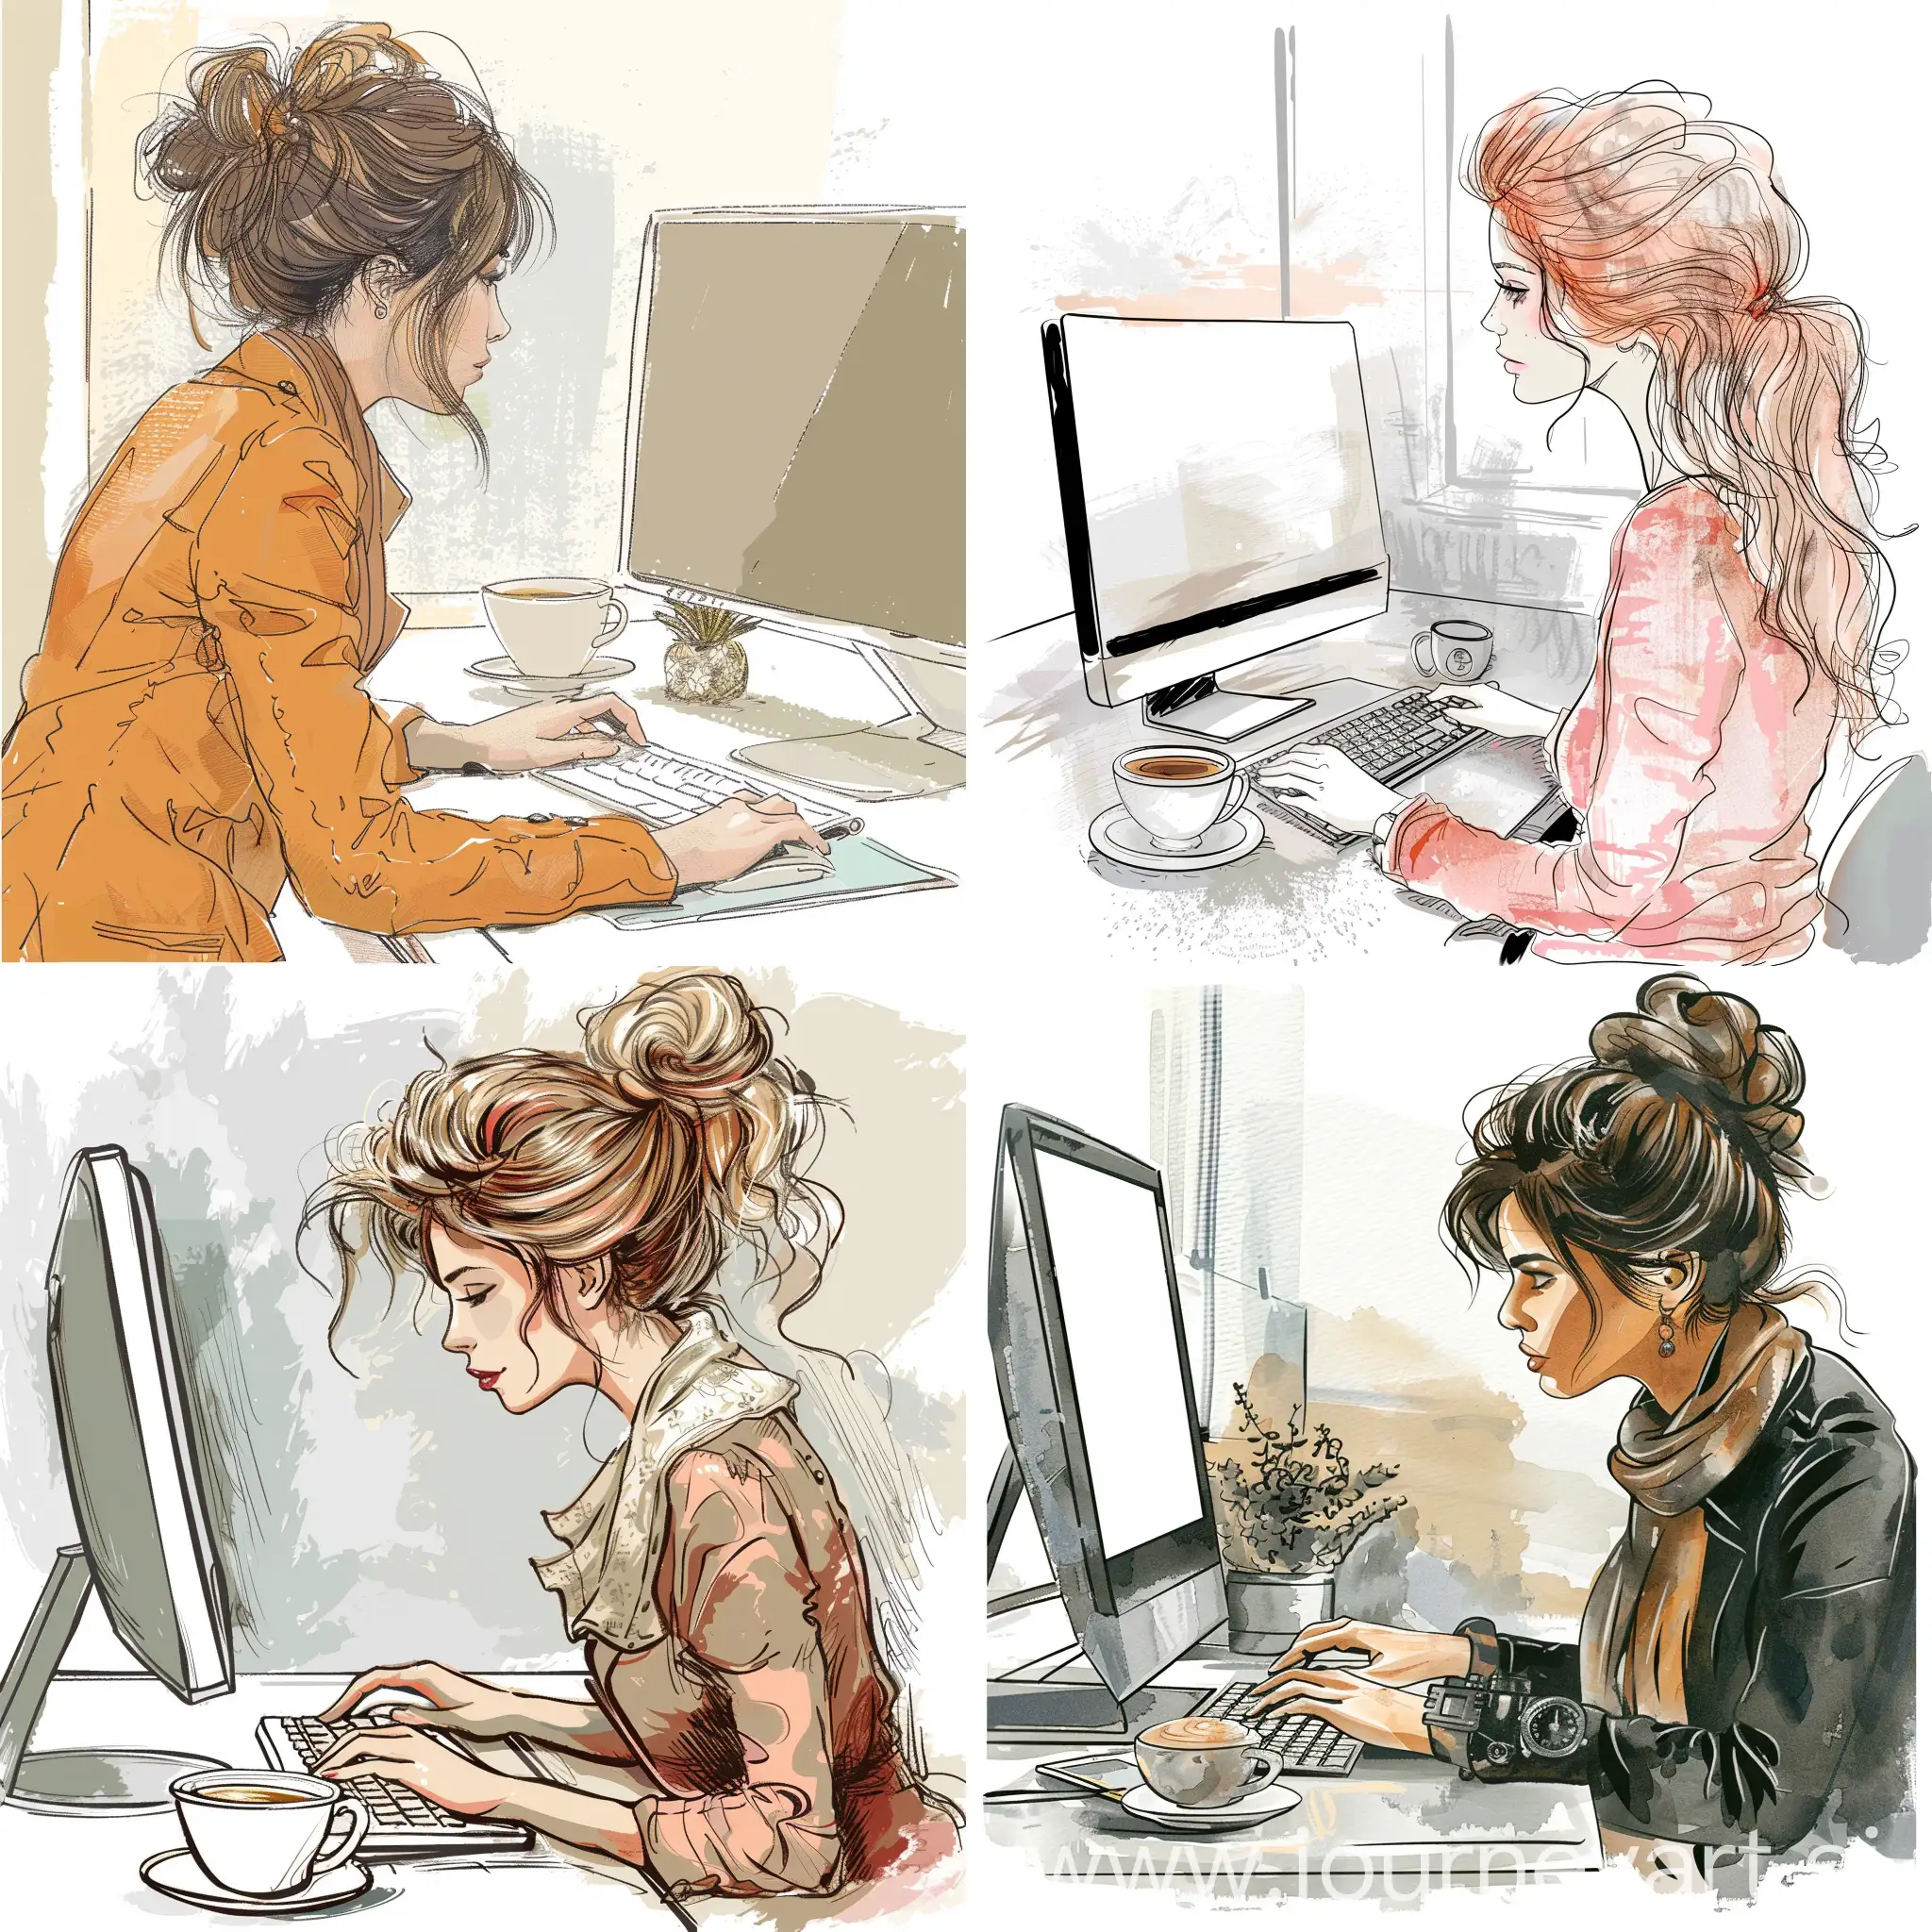 Fashionable-Girl-Typing-at-Office-Desk-with-Coffee-Cup